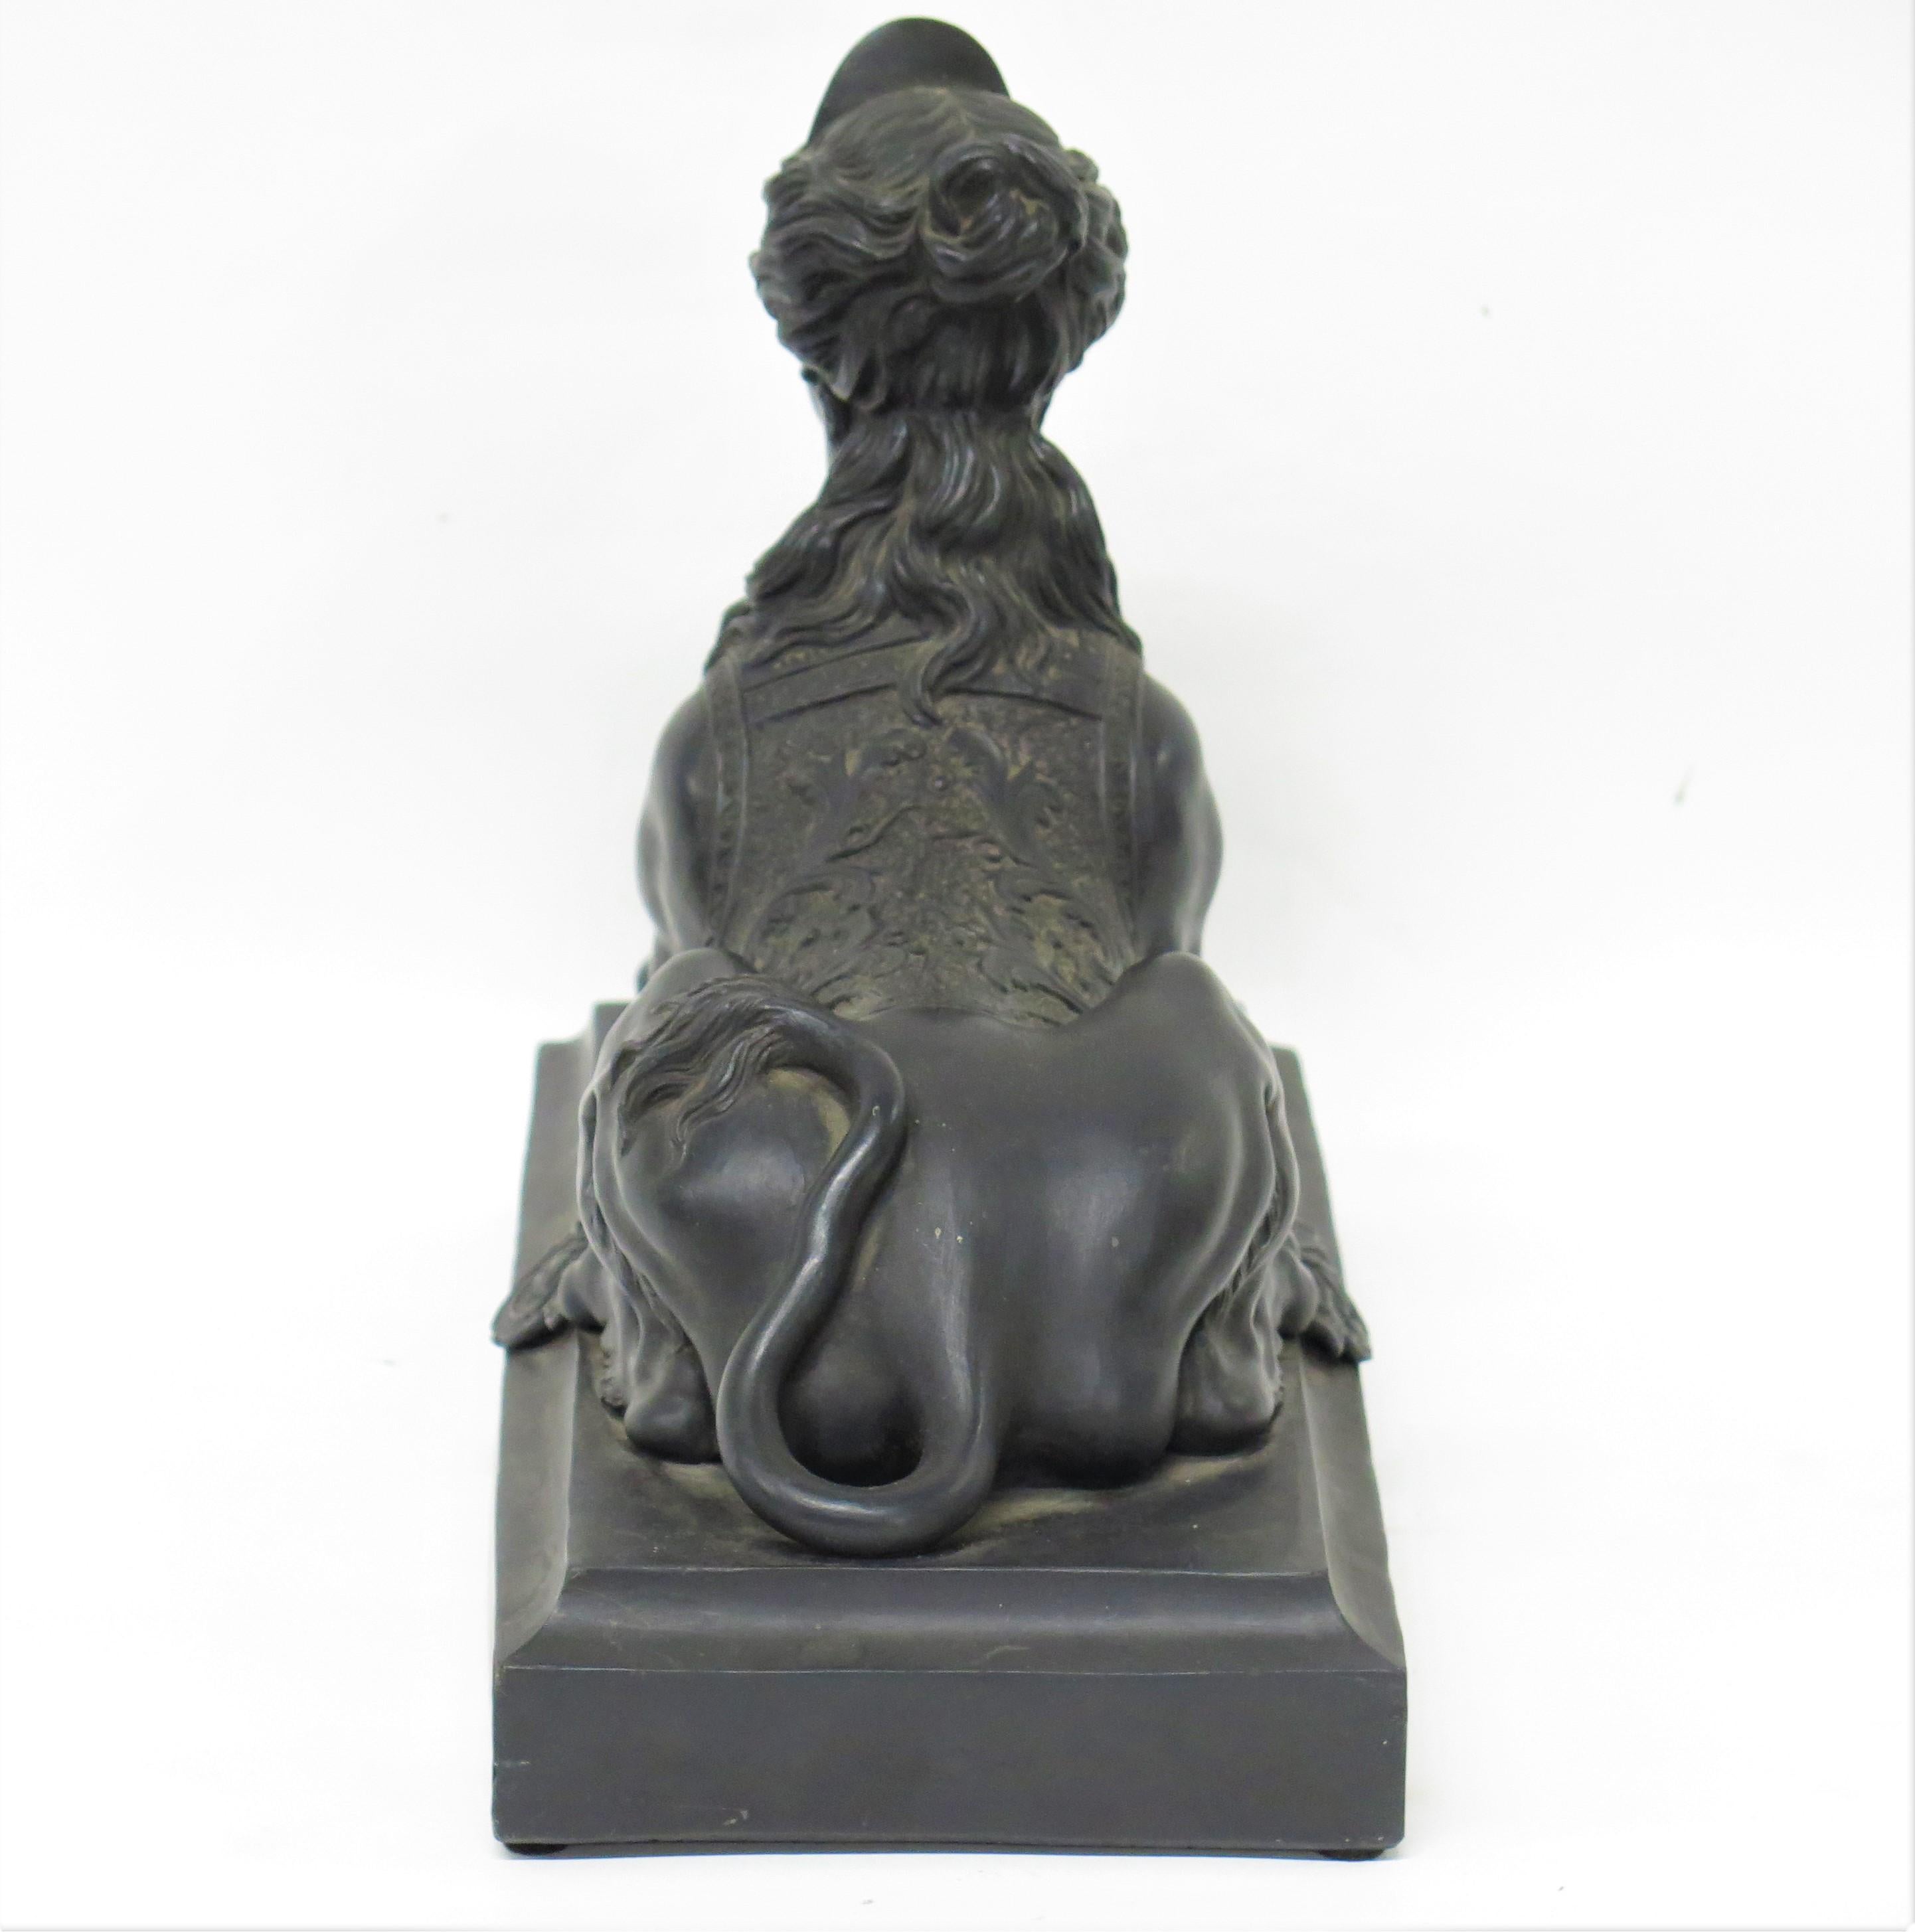 Hand-Crafted Wedgwood Black Basalt Grecian Sphinx After a Model by John Cheere (1709-1787) For Sale